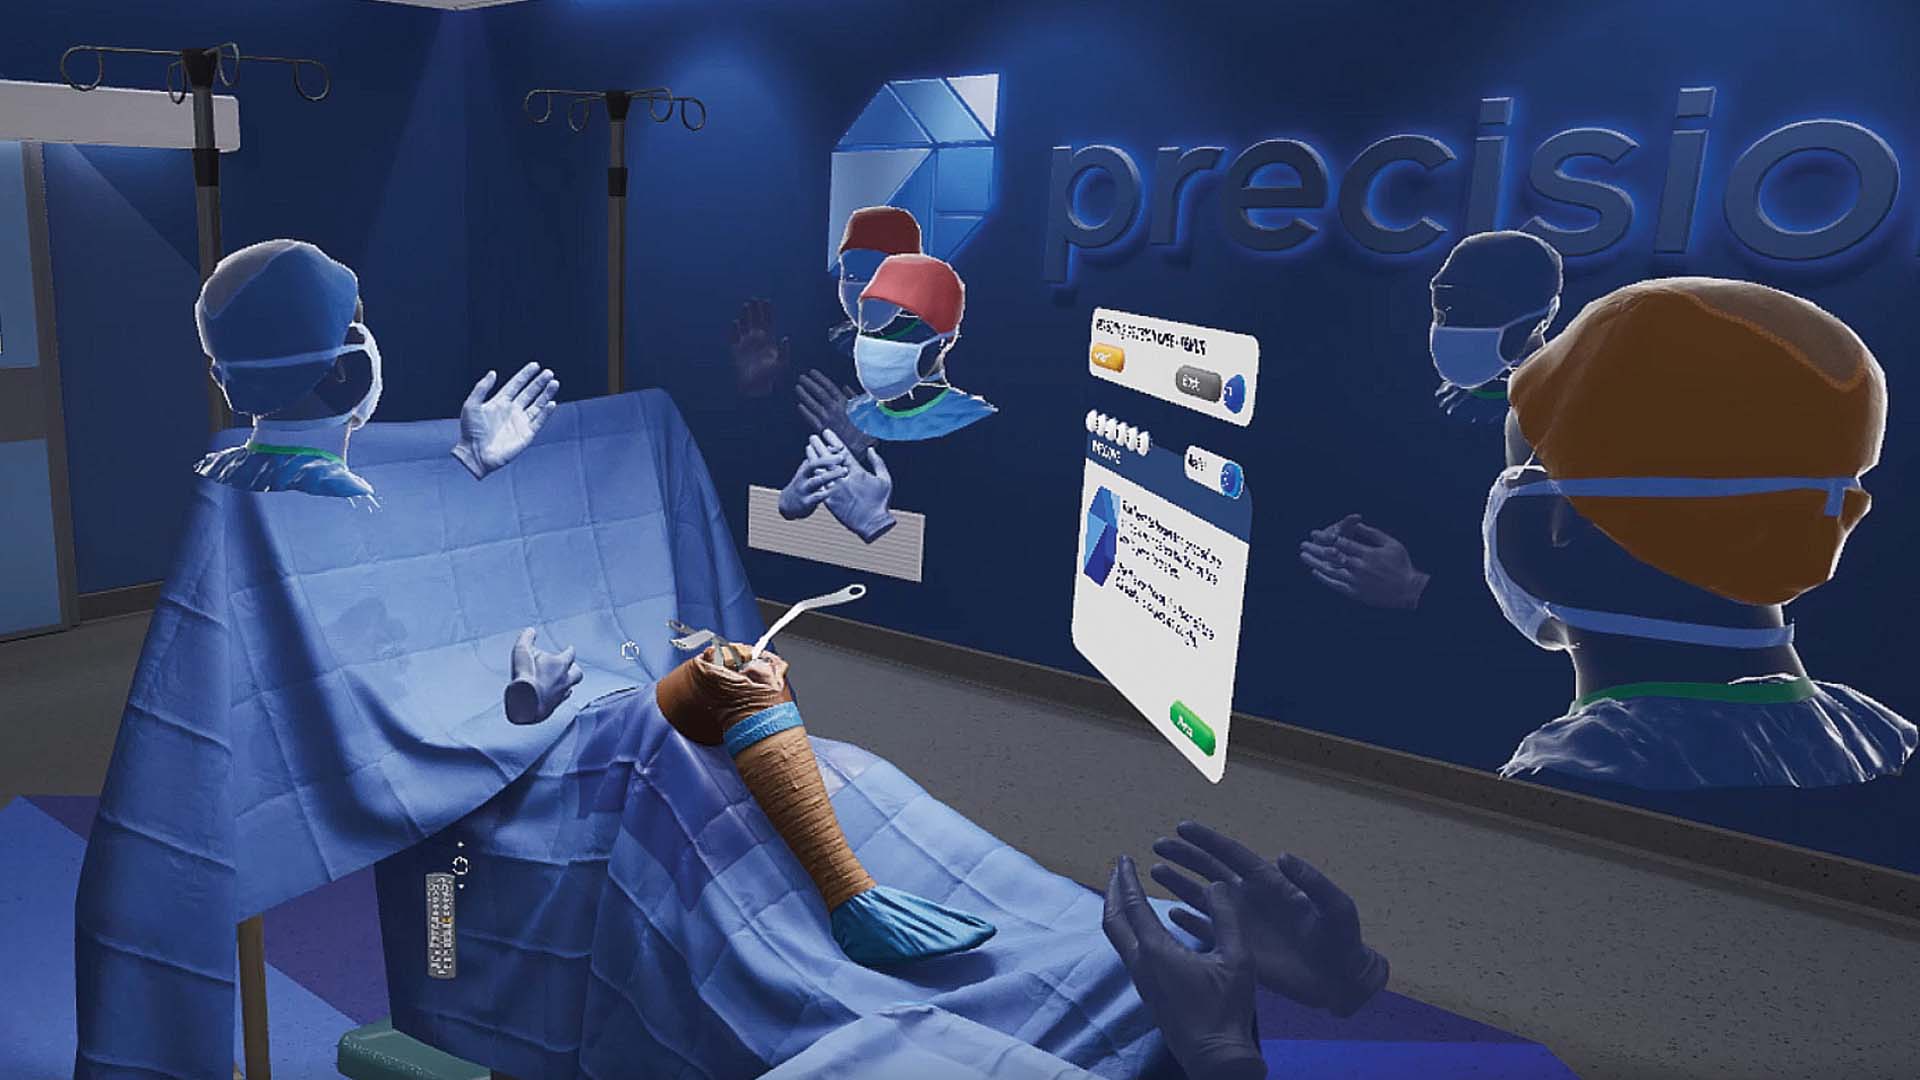 PrecisionOS’ multiplayer mode allows for simultaneous, remote use for multiple players; Photo Credit: PrecisionOS